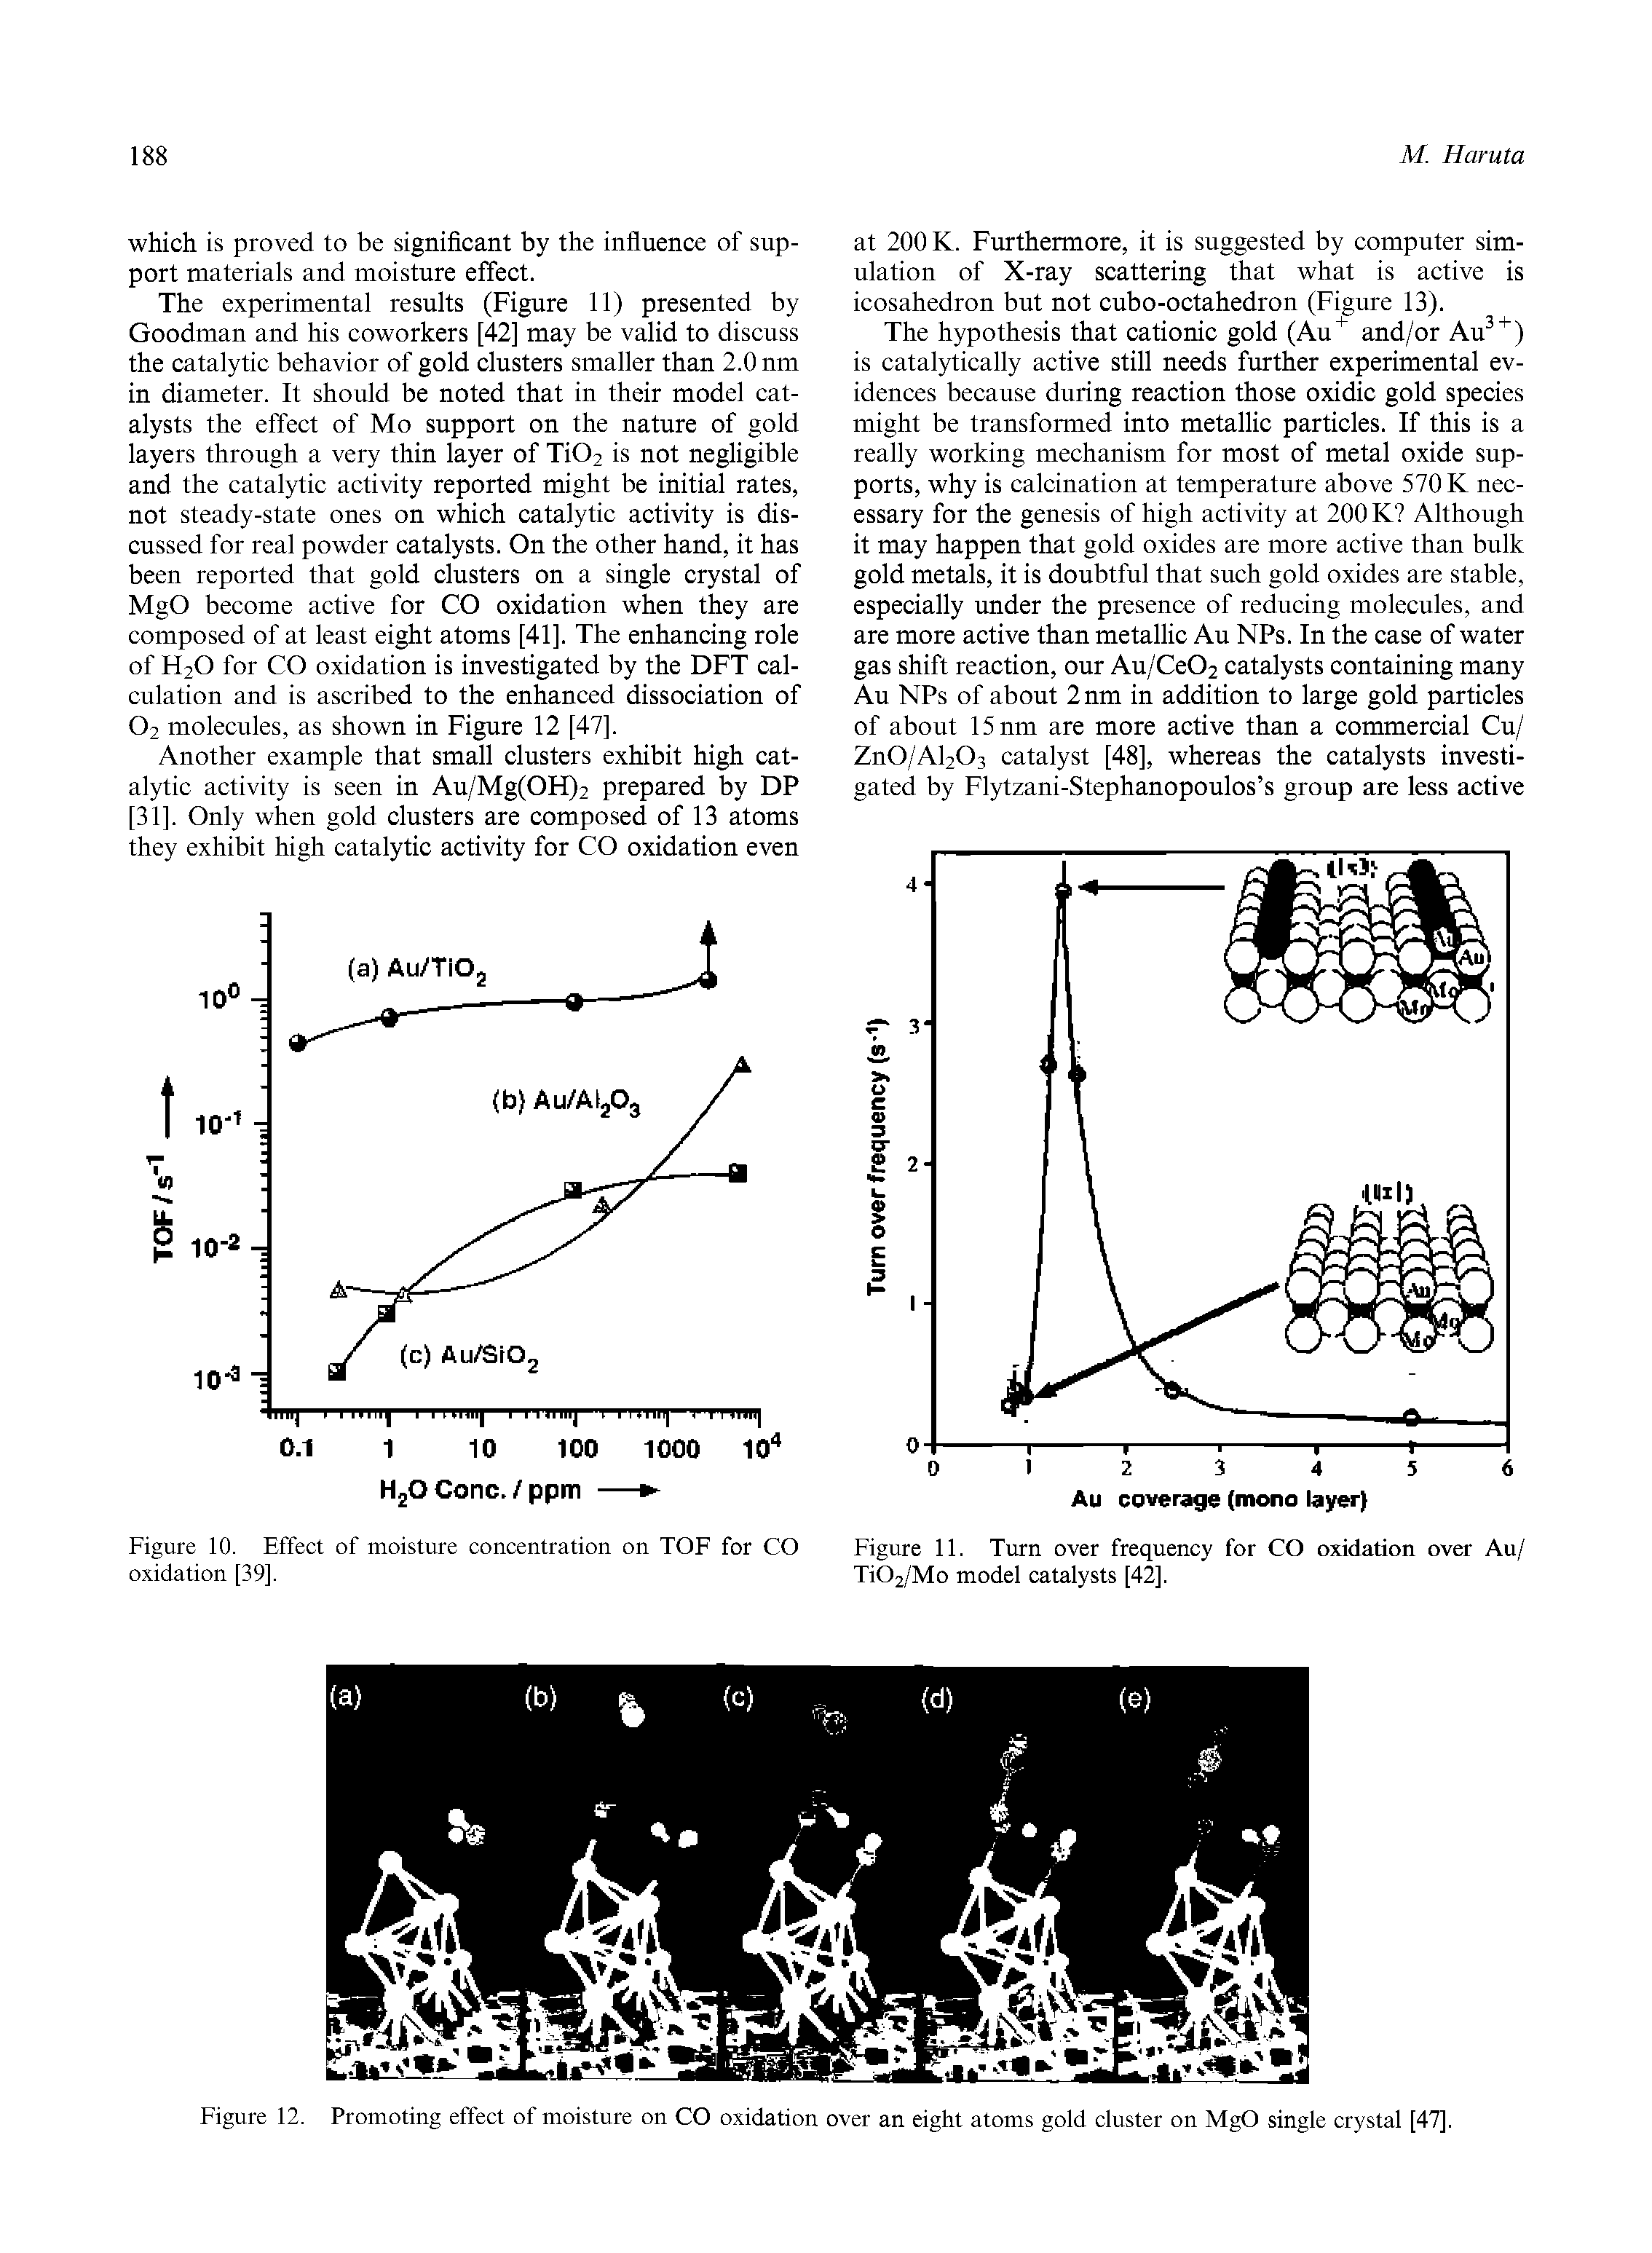 Figure 11. Turn over frequency for CO oxidation over Au/ Ti02/Mo model catalysts [42].